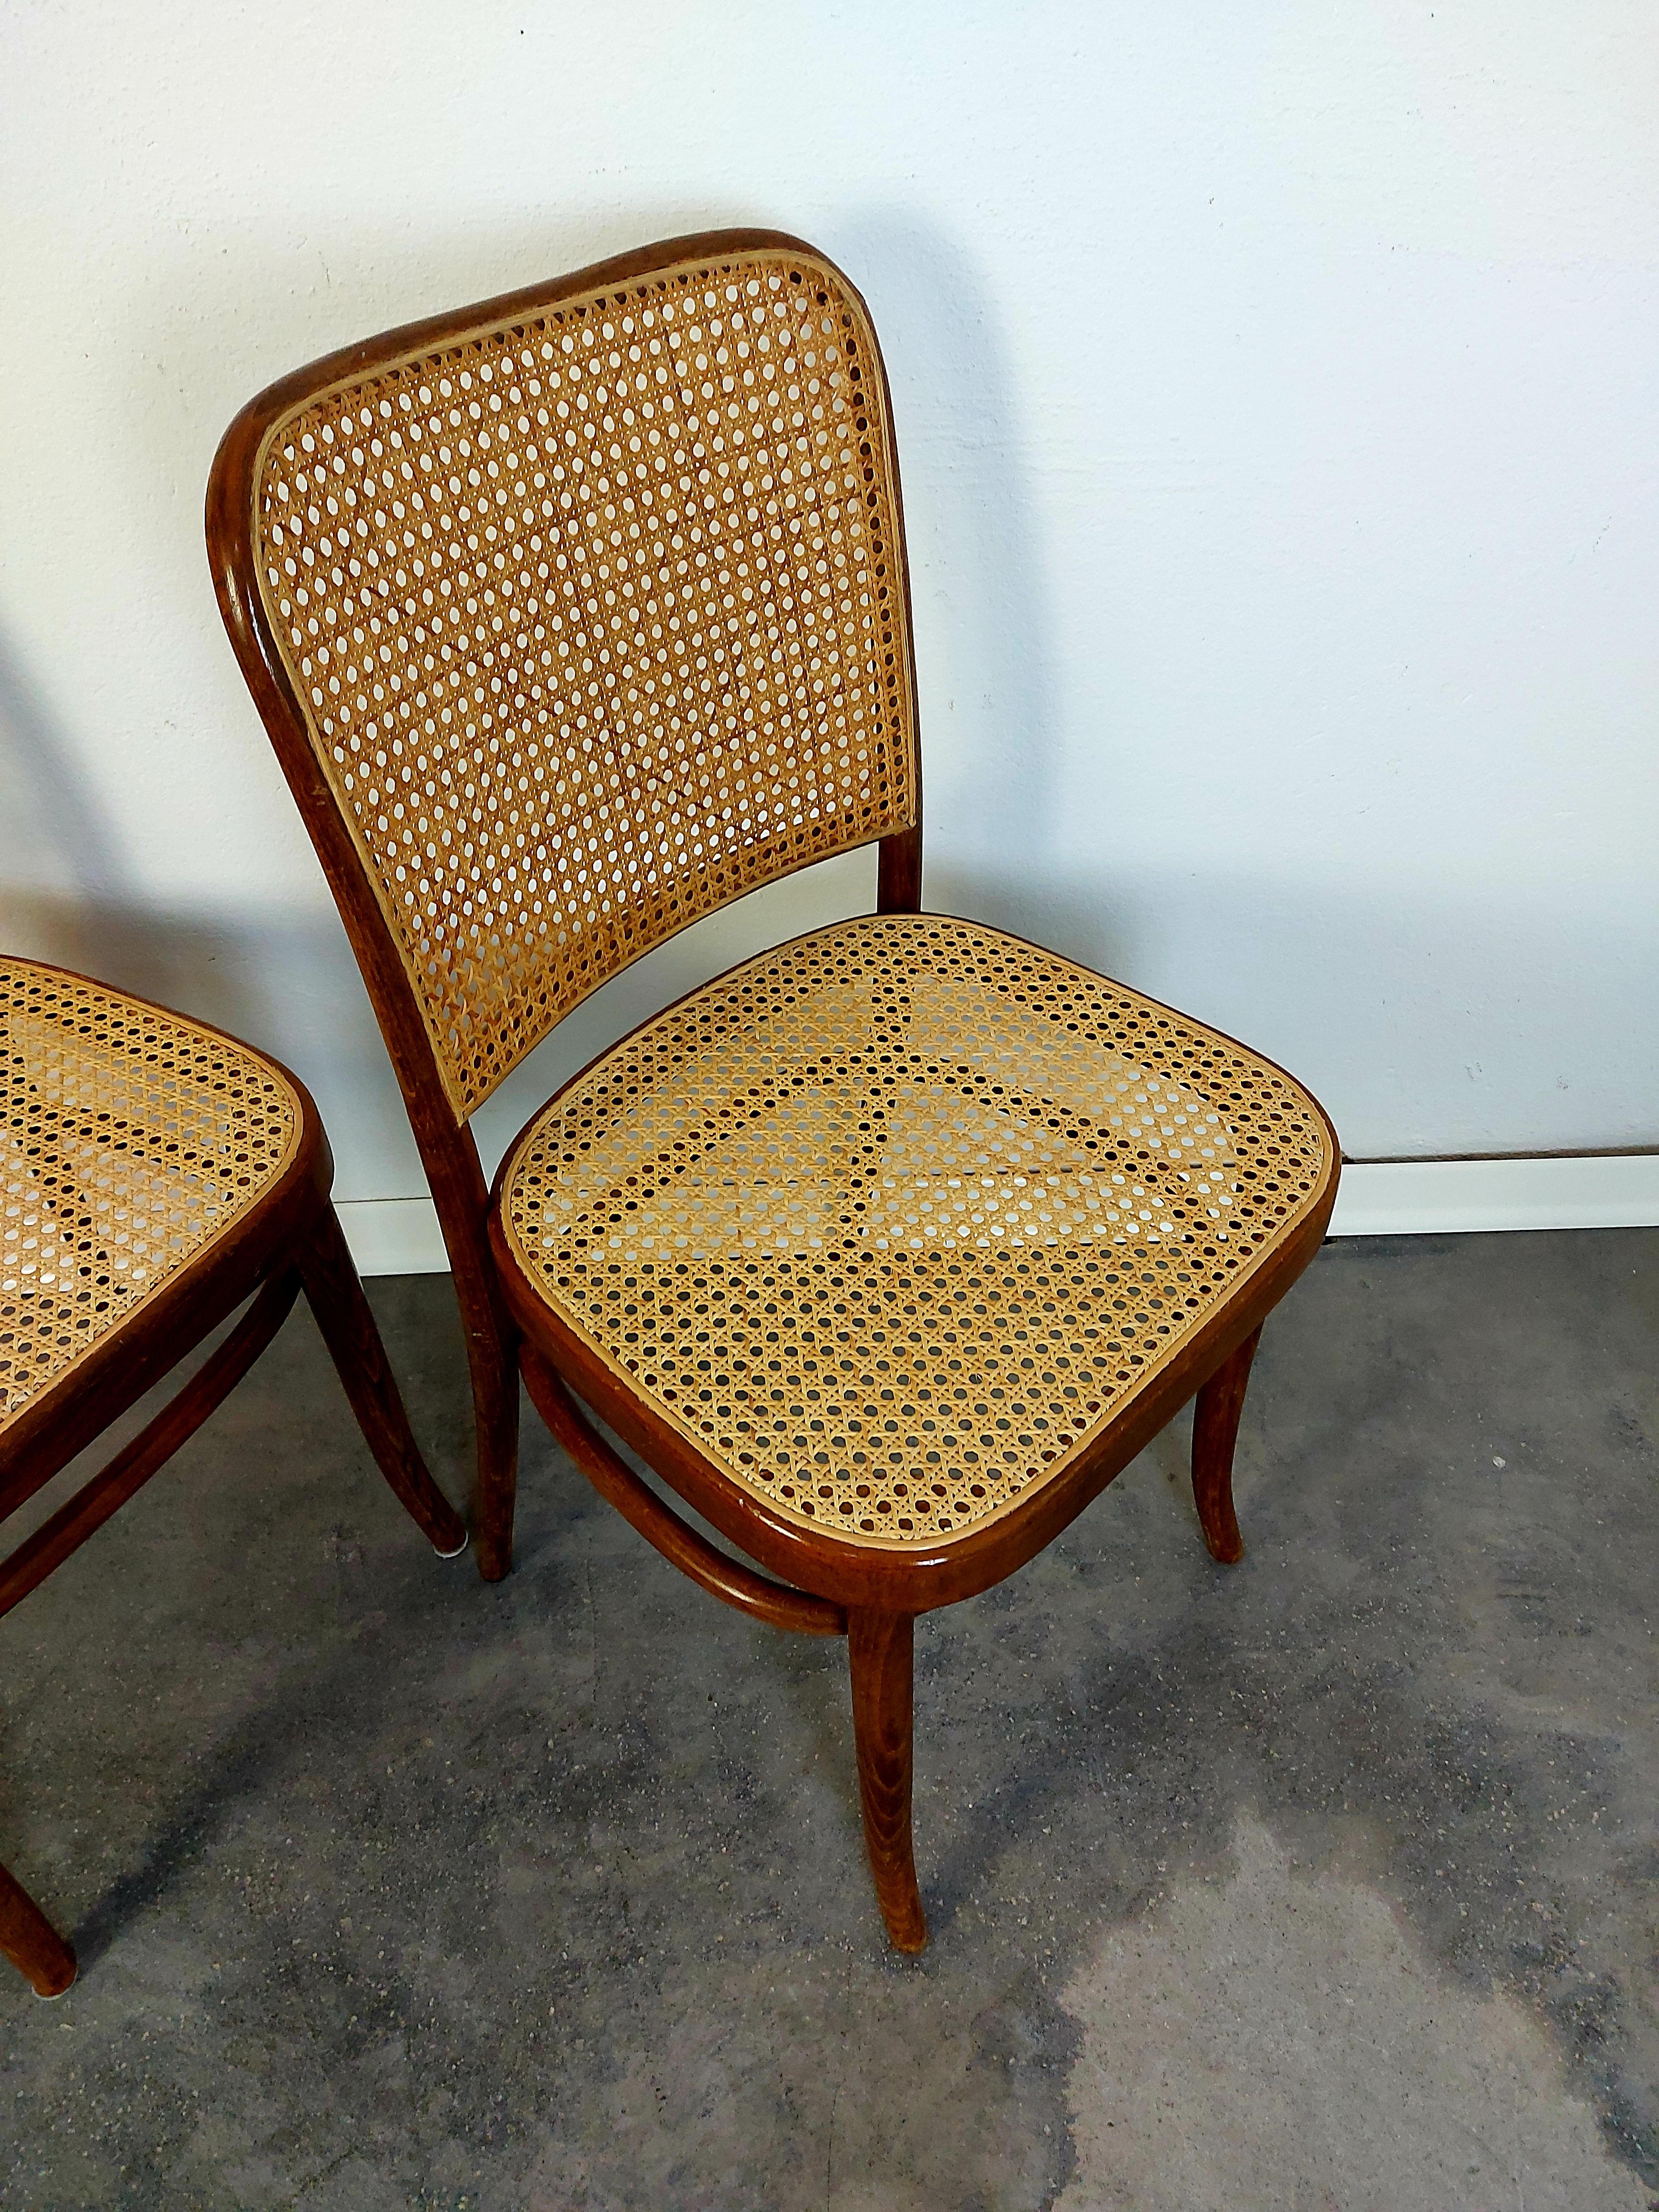 Cane Prague Chair, No. 811 Bentwood Chair, 1970s, 1 of 2